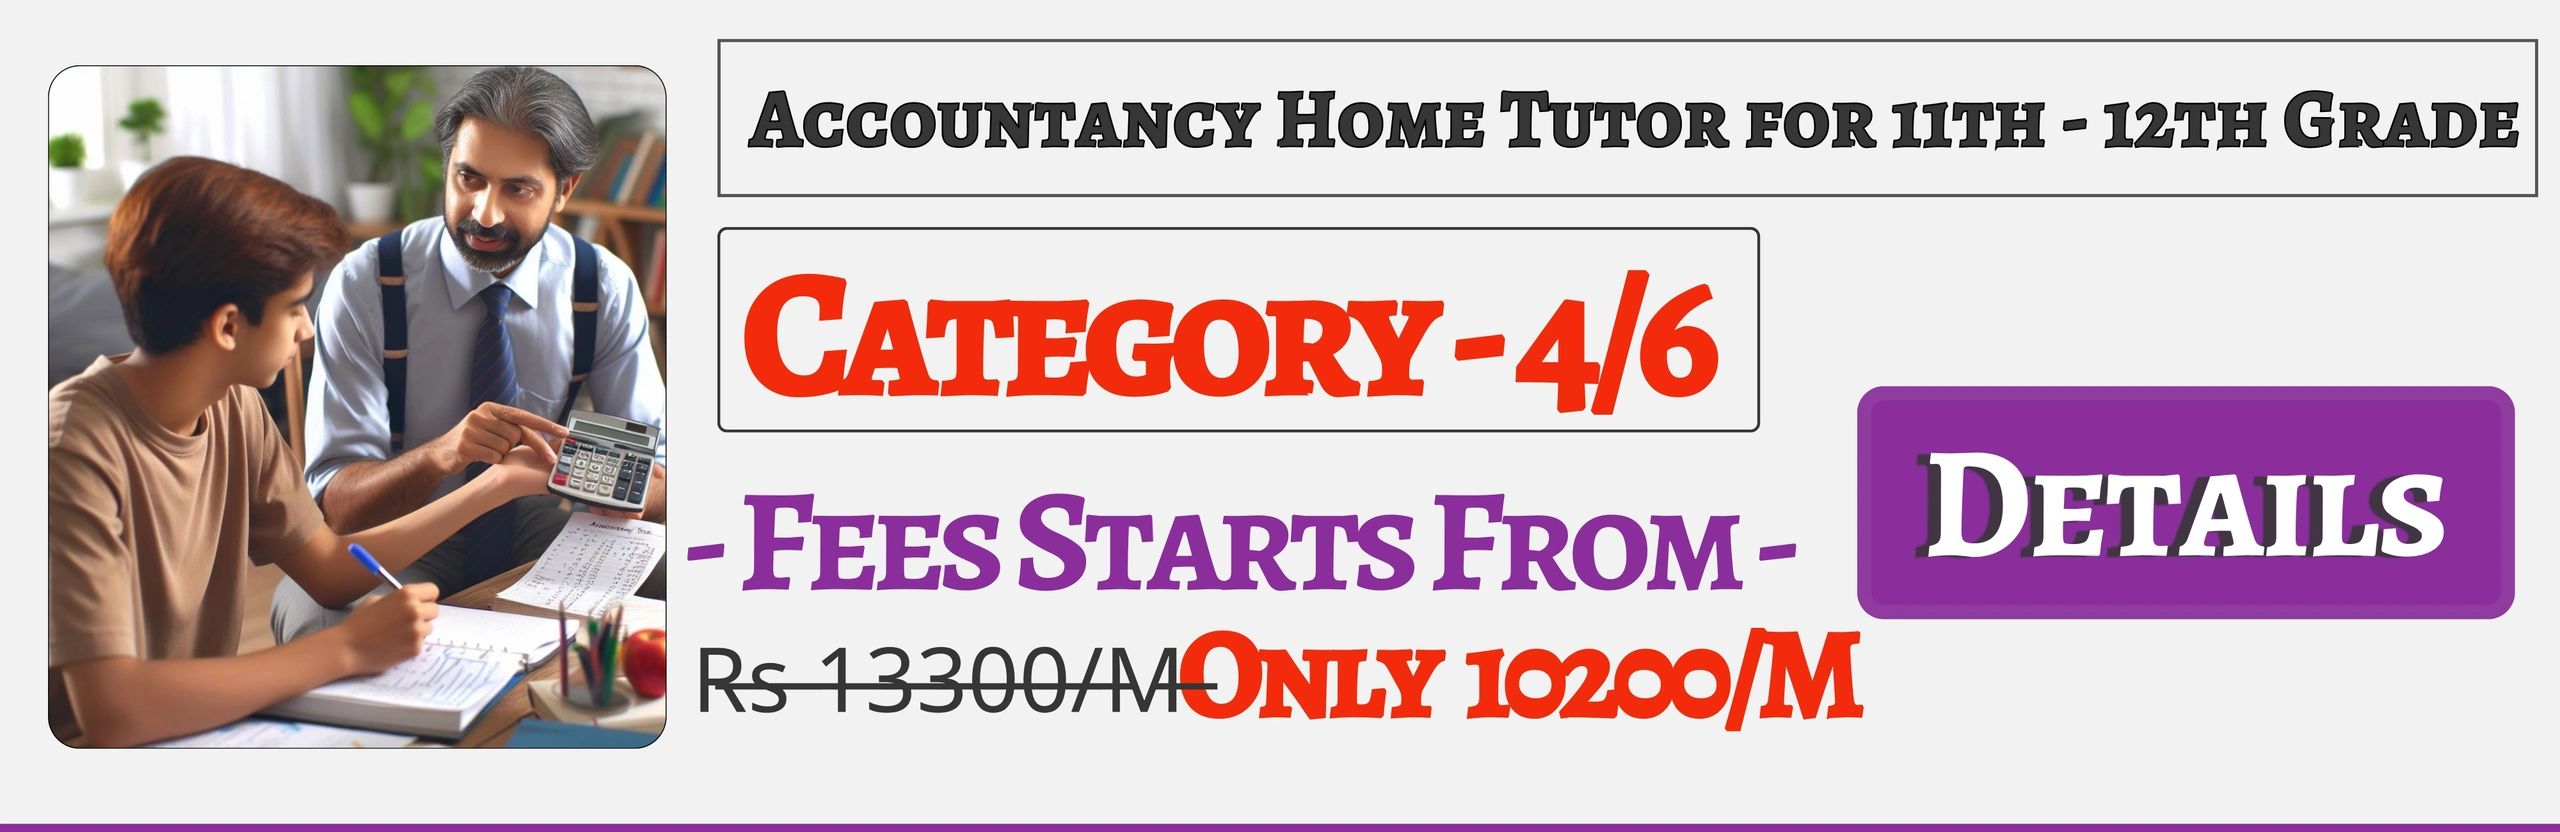 Book Best Nearby Accountancy Home Tuition Tutors For 11th & 12th Jaipur ,Fees Only 10200/M